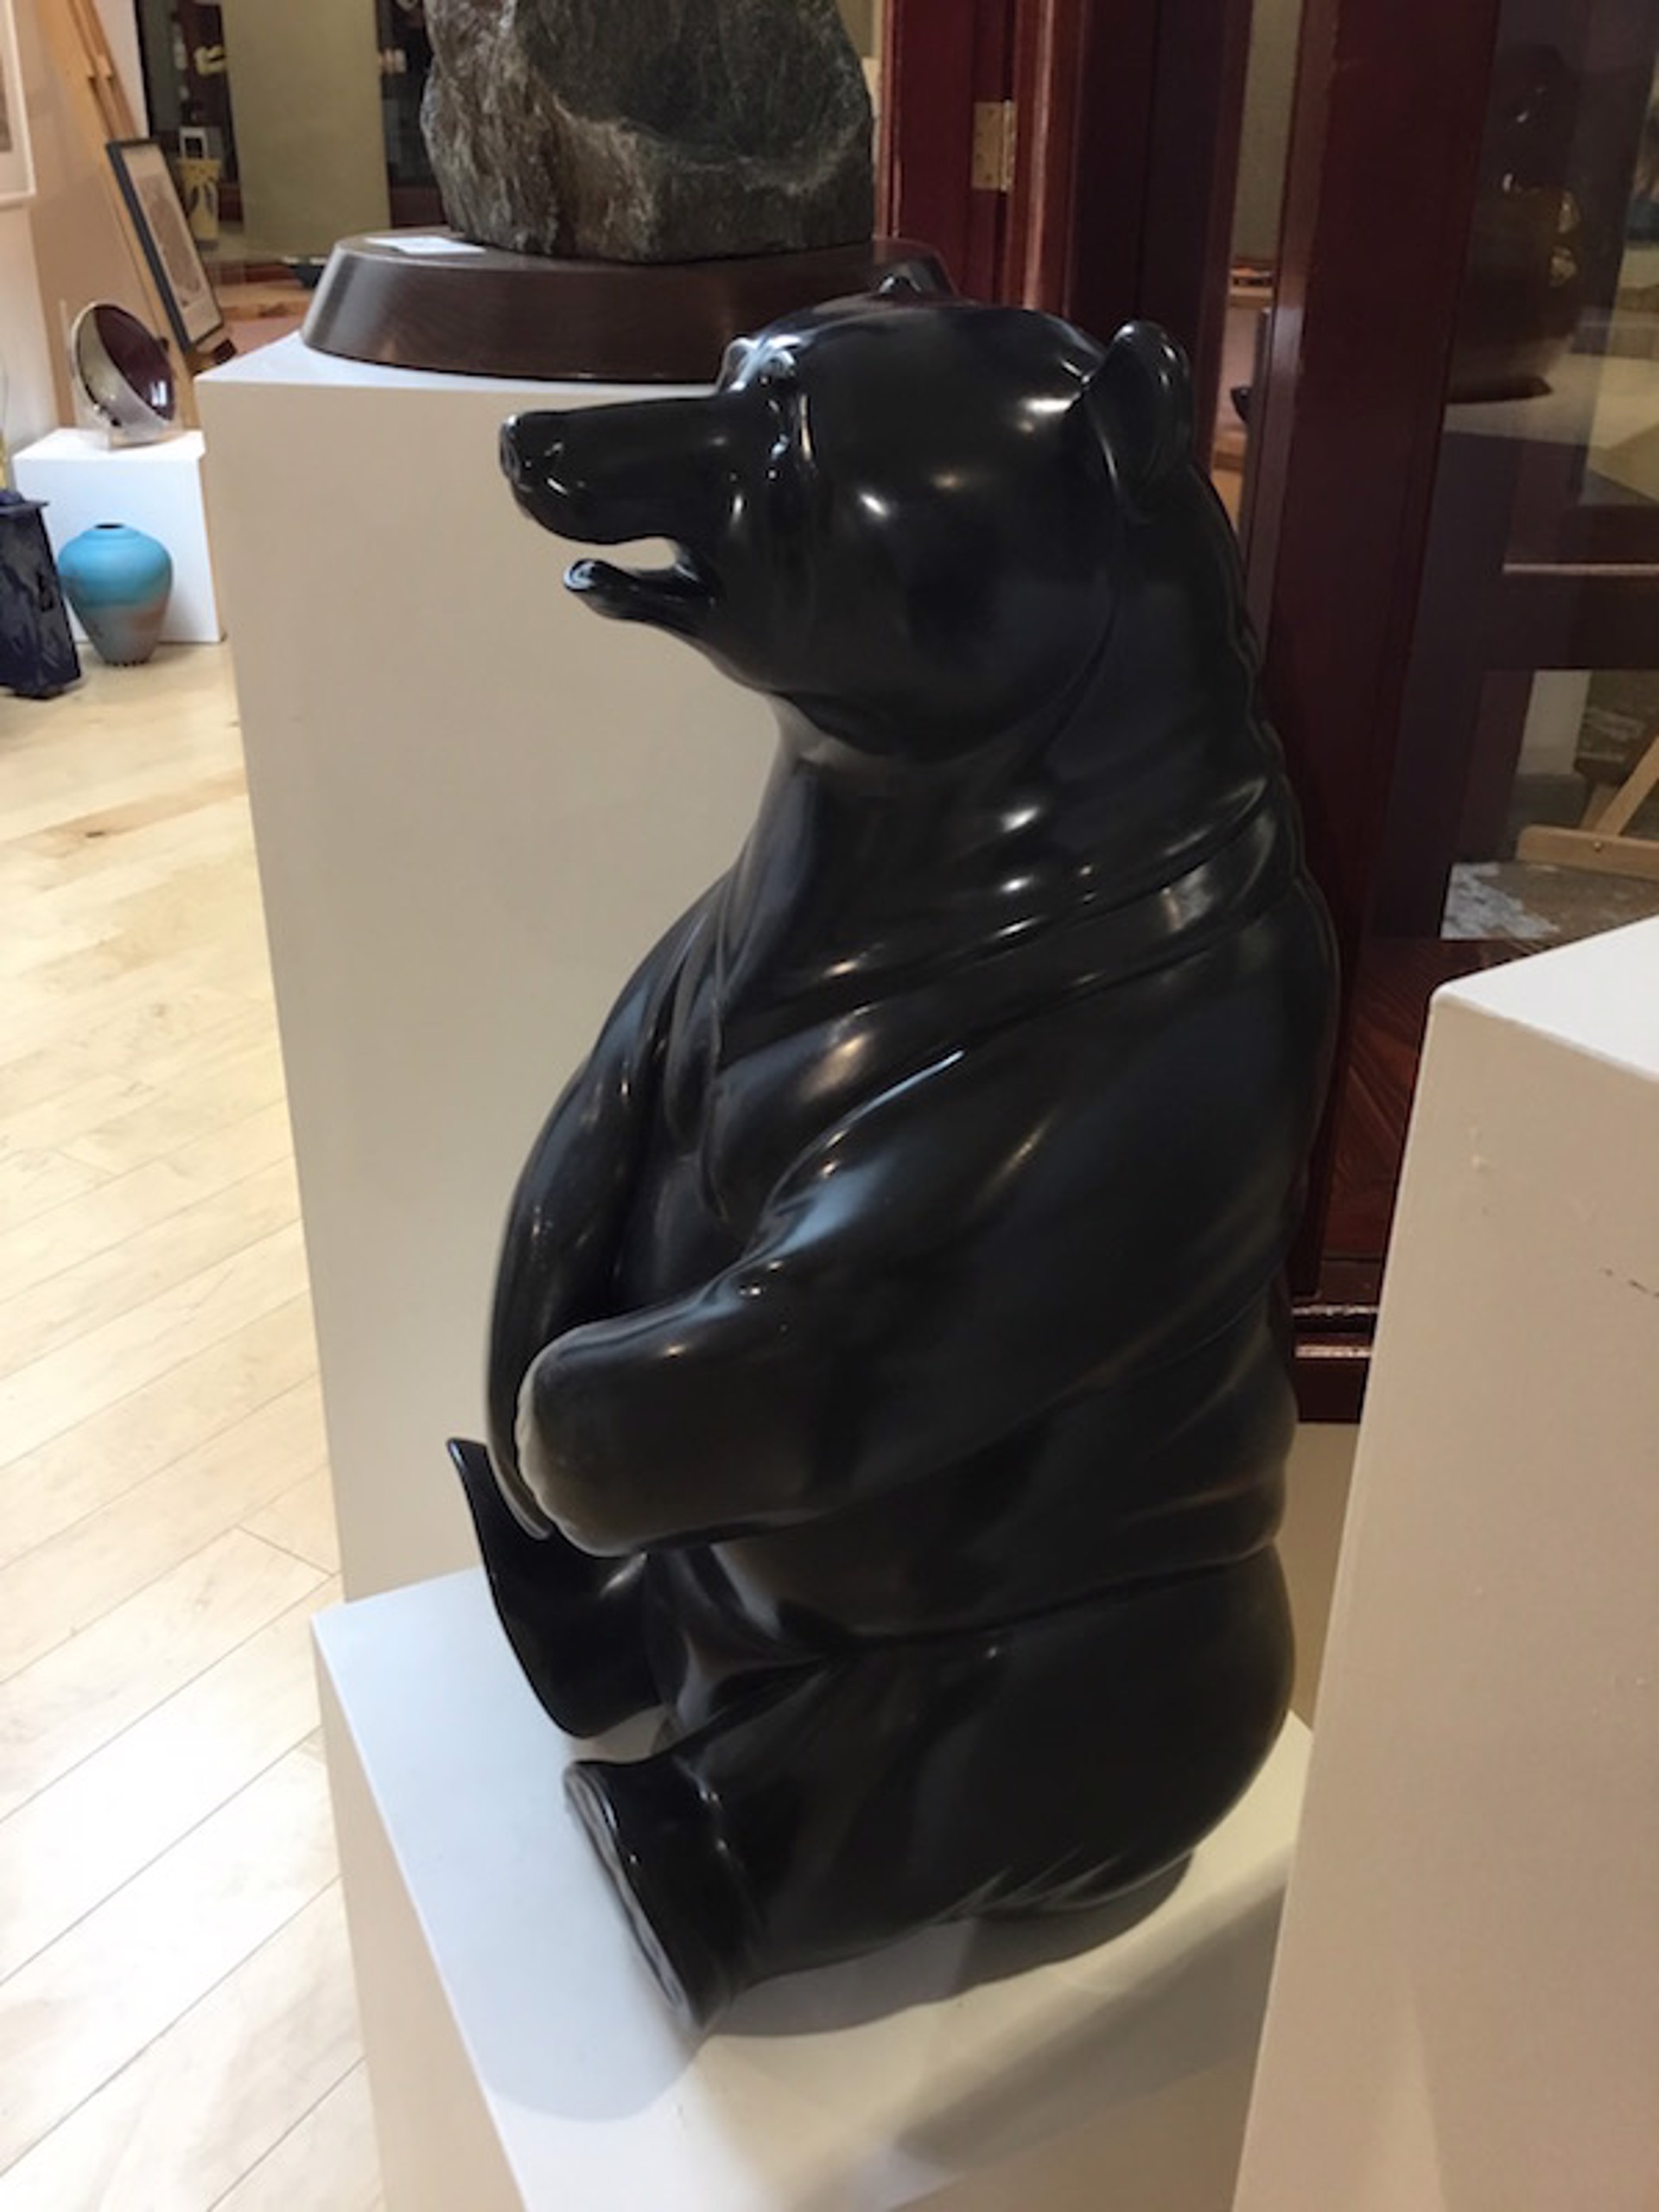 Sitting Up Bear by Les Dunlop